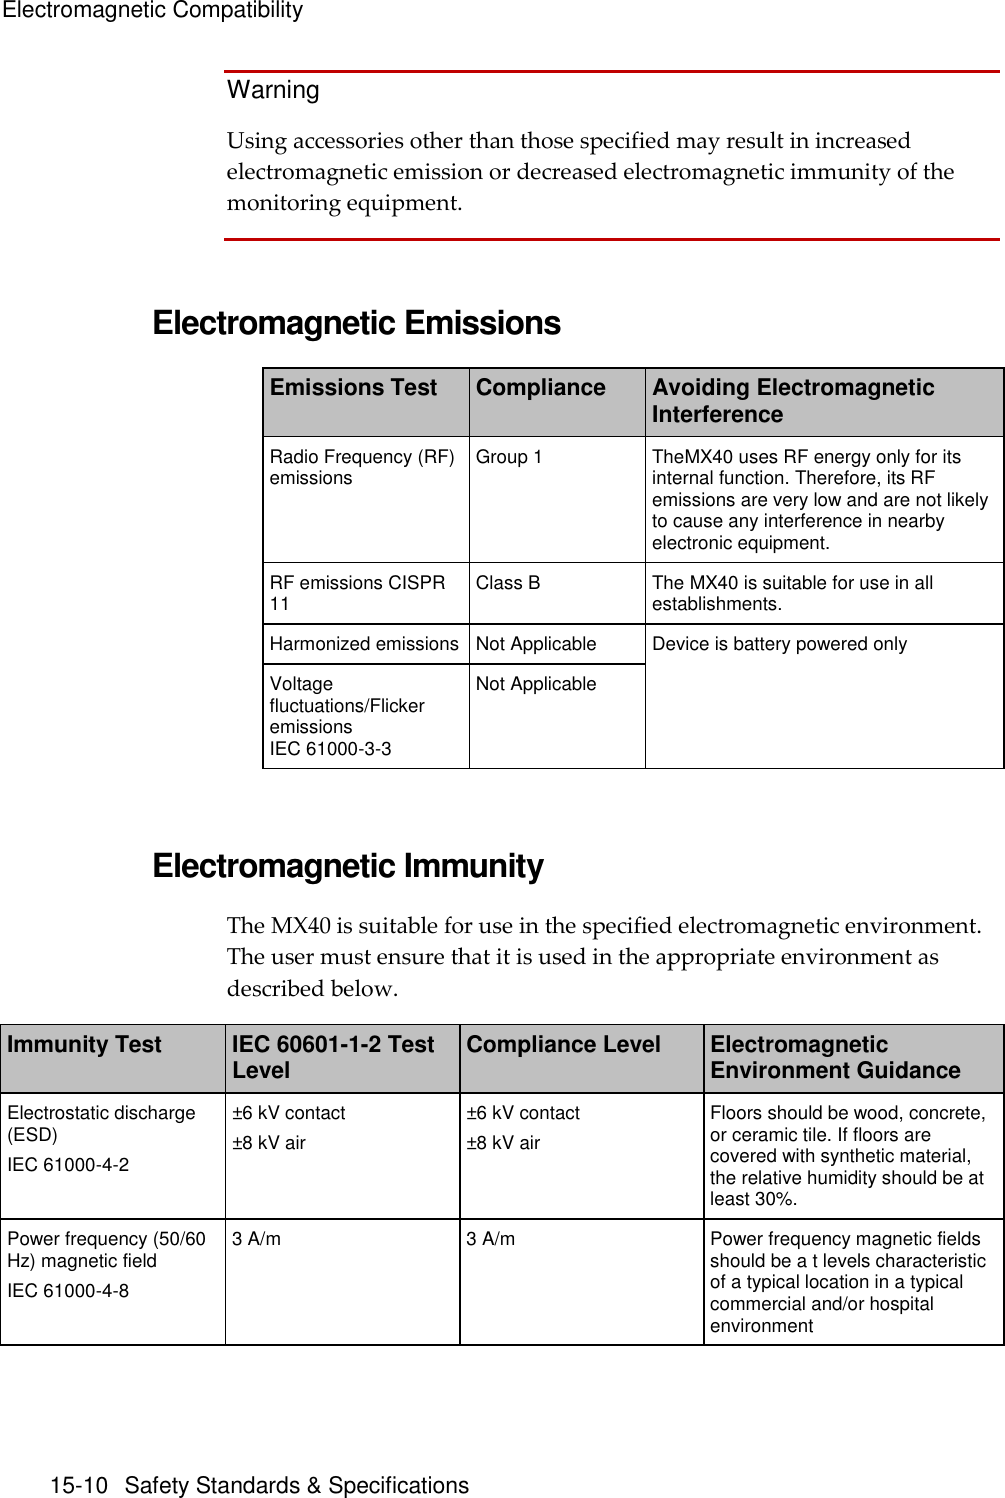 Electromagnetic Compatibility  15-10  Safety Standards &amp; Specifications Warning Using accessories other than those specified may result in increased electromagnetic emission or decreased electromagnetic immunity of the monitoring equipment.   Electromagnetic Emissions Emissions Test Compliance Avoiding Electromagnetic Interference Radio Frequency (RF) emissions Group 1 TheMX40 uses RF energy only for its internal function. Therefore, its RF emissions are very low and are not likely to cause any interference in nearby electronic equipment. RF emissions CISPR 11 Class B The MX40 is suitable for use in all establishments. Harmonized emissions Not Applicable Device is battery powered only Voltage fluctuations/Flicker emissions IEC 61000-3-3 Not Applicable   Electromagnetic Immunity The MX40 is suitable for use in the specified electromagnetic environment. The user must ensure that it is used in the appropriate environment as described below. Immunity Test IEC 60601-1-2 Test Level Compliance Level Electromagnetic Environment Guidance Electrostatic discharge (ESD)   IEC 61000-4-2 ±6 kV contact ±8 kV air ±6 kV contact ±8 kV air Floors should be wood, concrete, or ceramic tile. If floors are covered with synthetic material, the relative humidity should be at least 30%. Power frequency (50/60 Hz) magnetic field IEC 61000-4-8 3 A/m 3 A/m Power frequency magnetic fields should be a t levels characteristic of a typical location in a typical commercial and/or hospital environment   